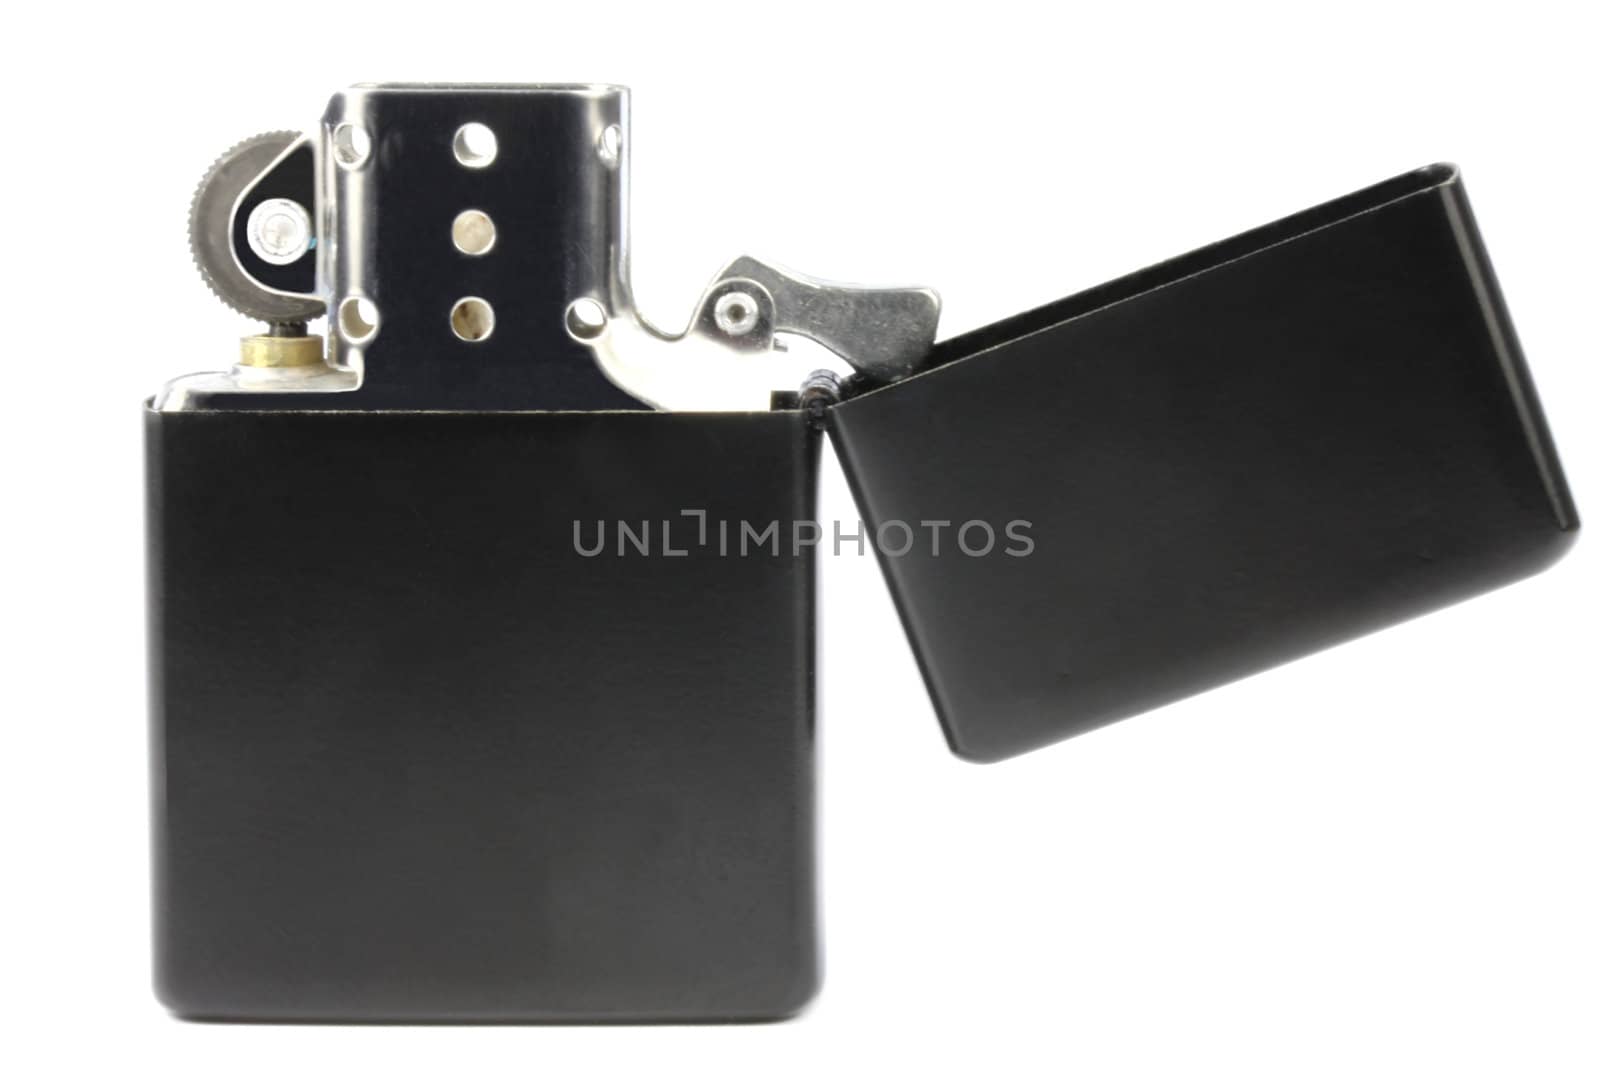 Black lighter on a white background by TVR